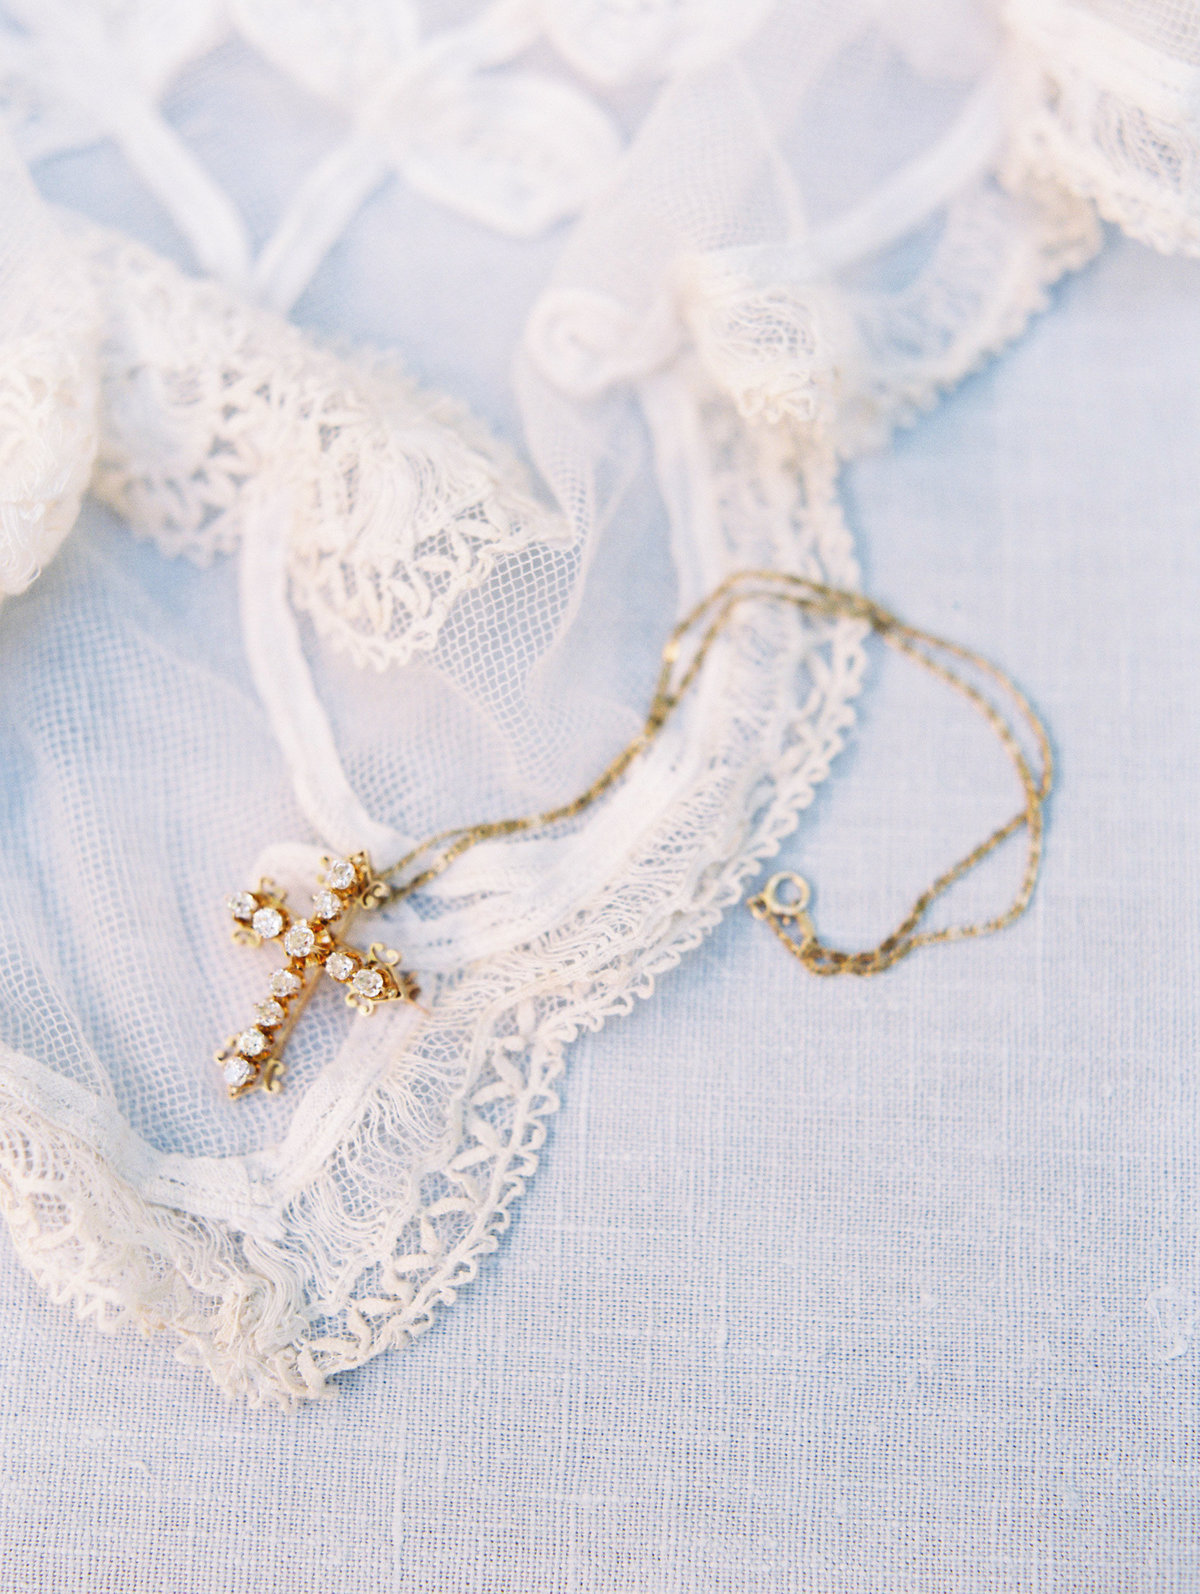 heirloom necklace and wedding veil